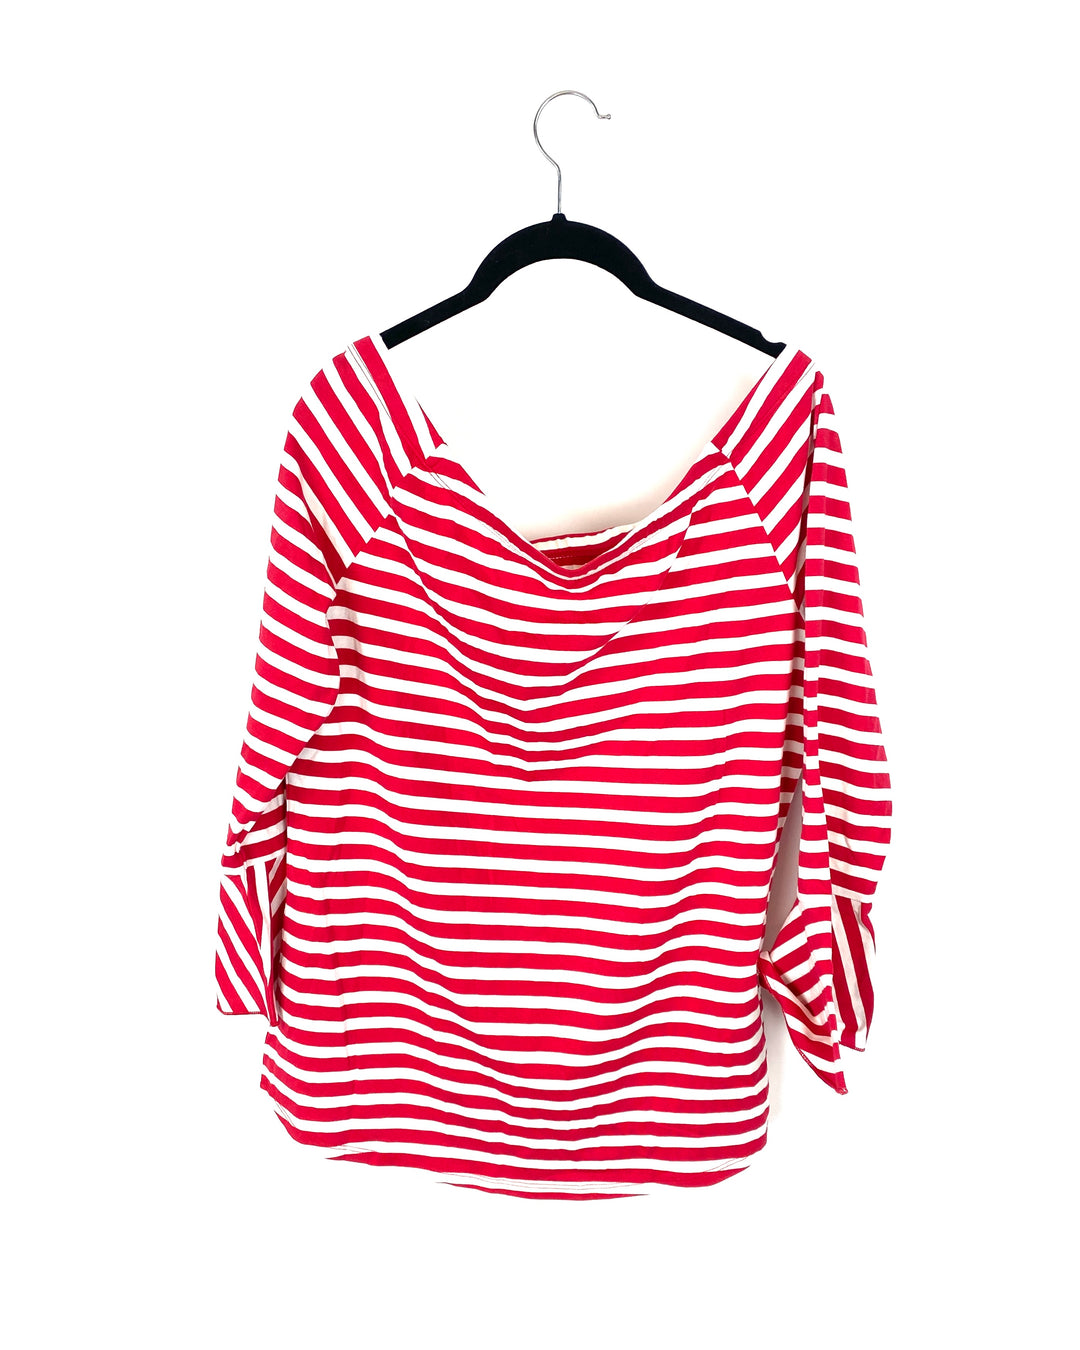 Red And White Striped Top- Small/Medium, Large/Extra Large